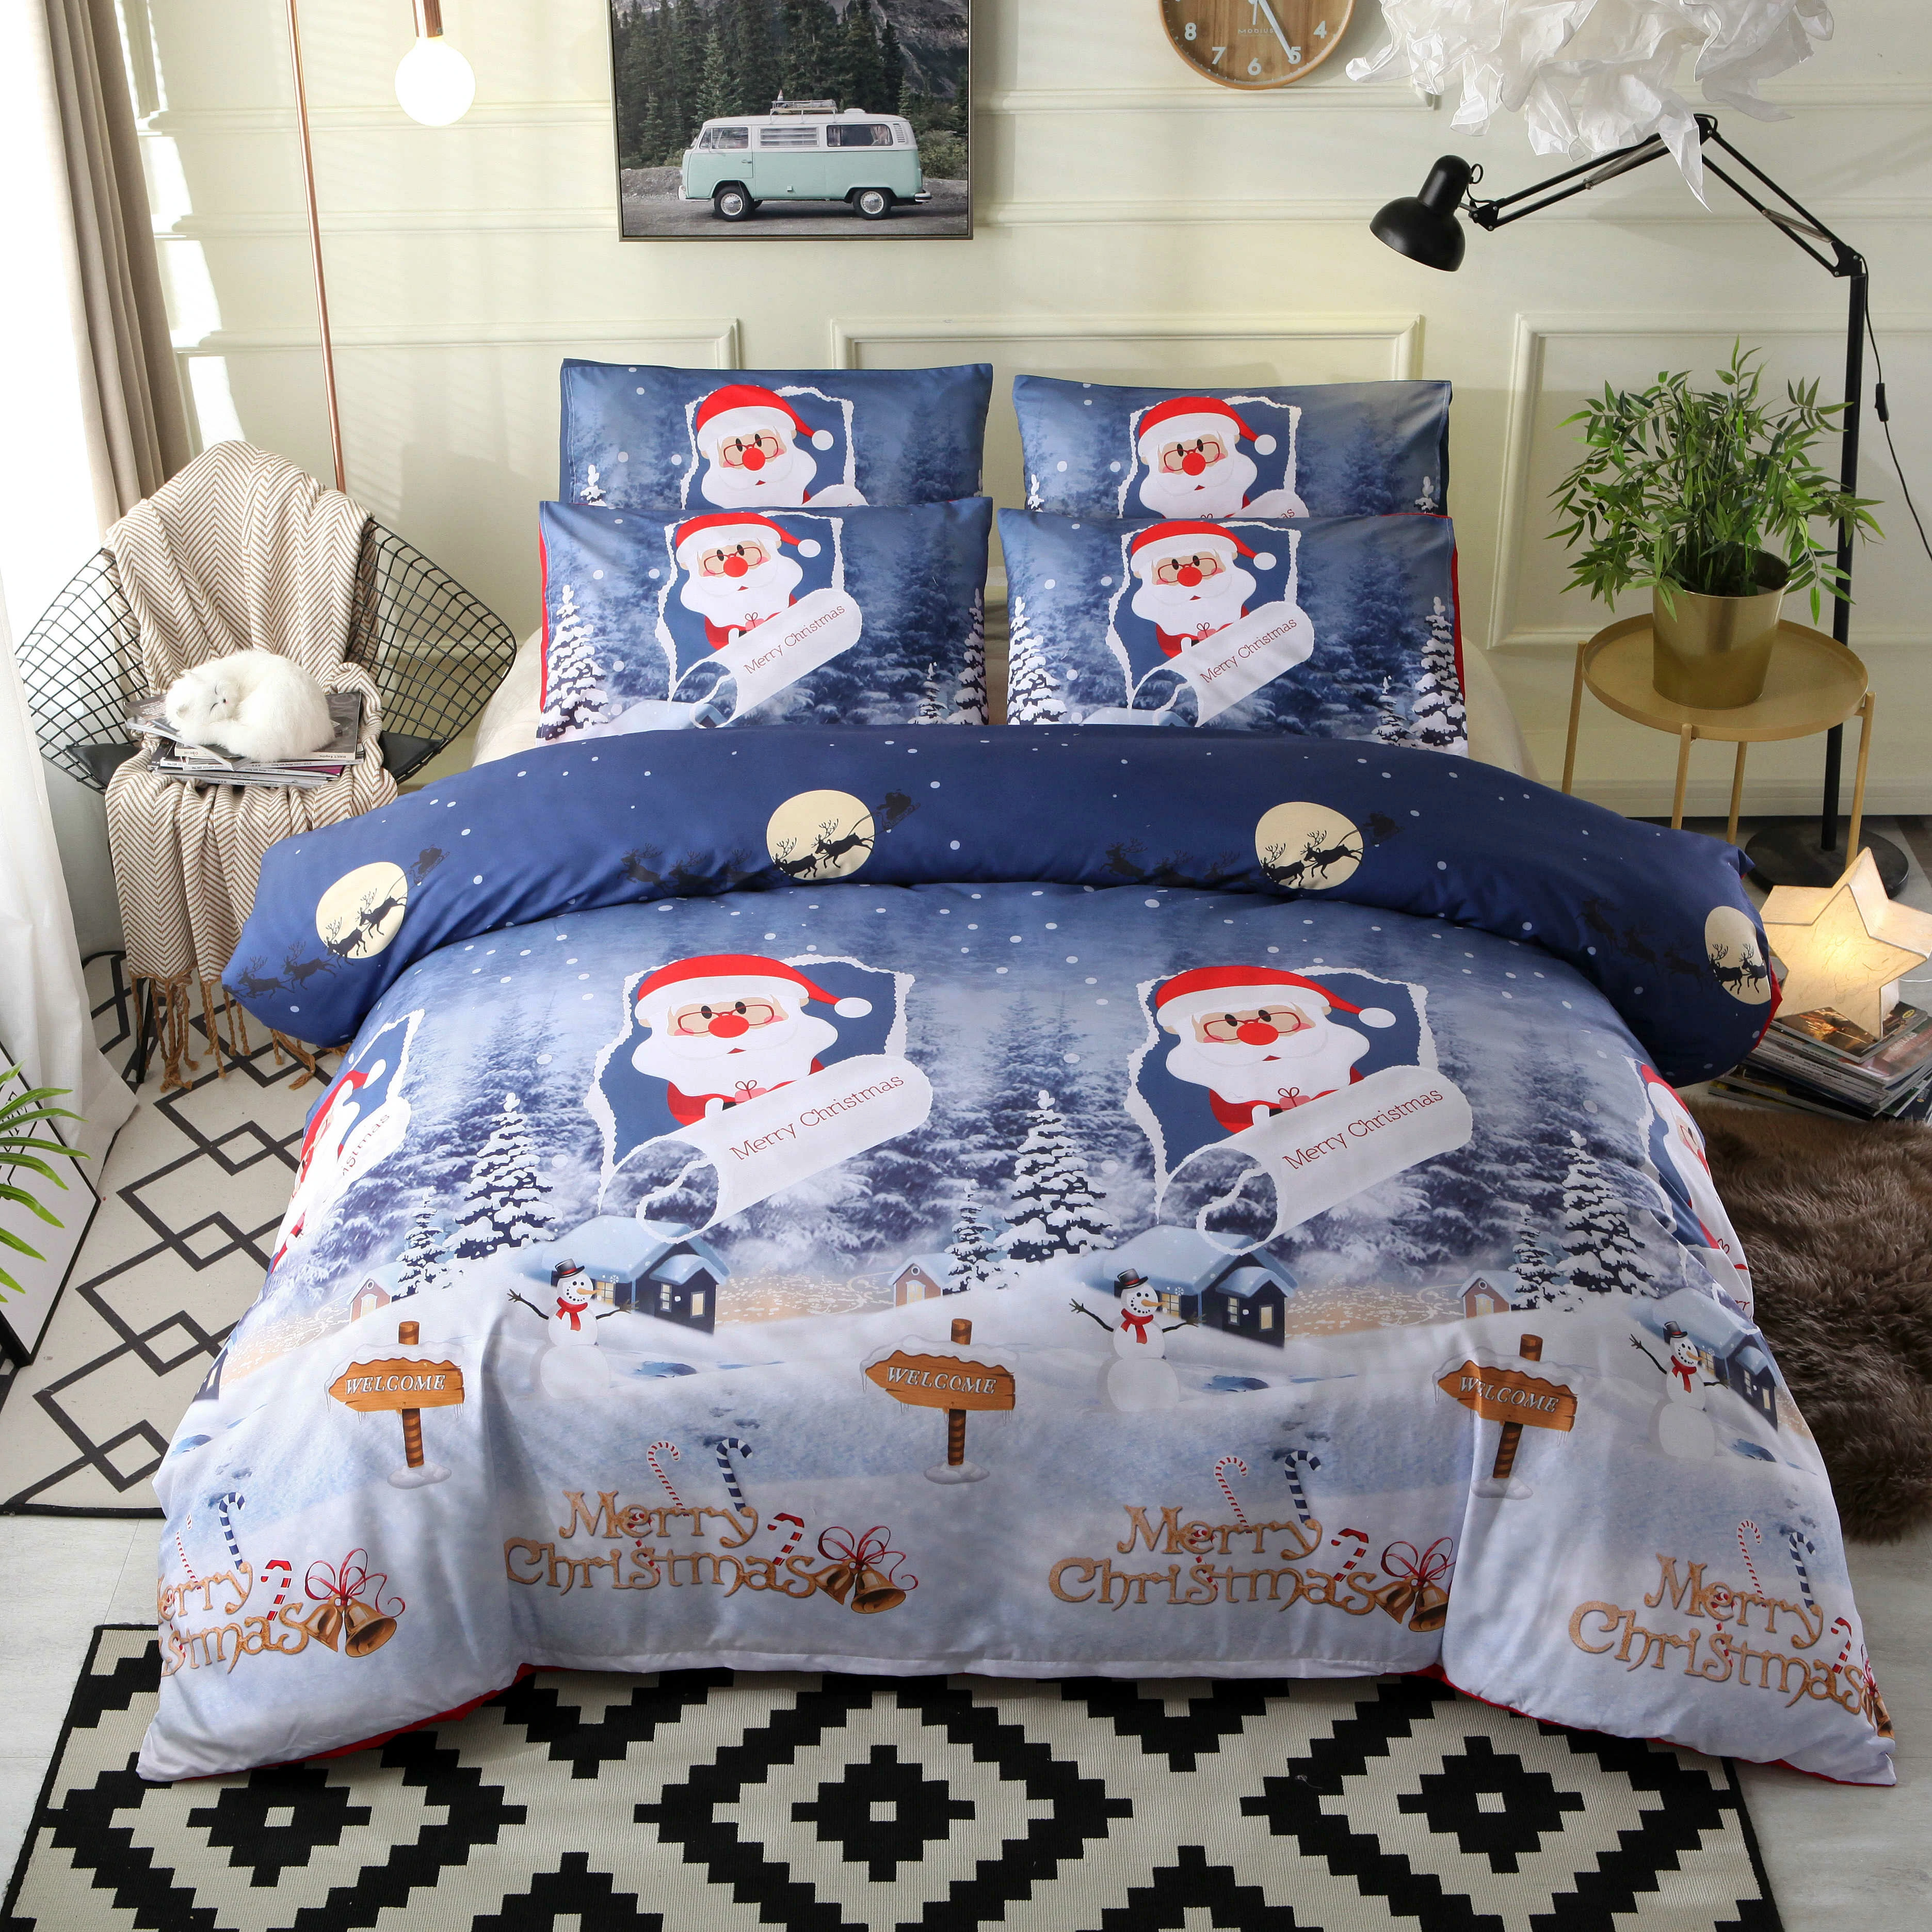 3 Pcs Bedding Sets Happy Christmas Quilt Cover Pillowcase For